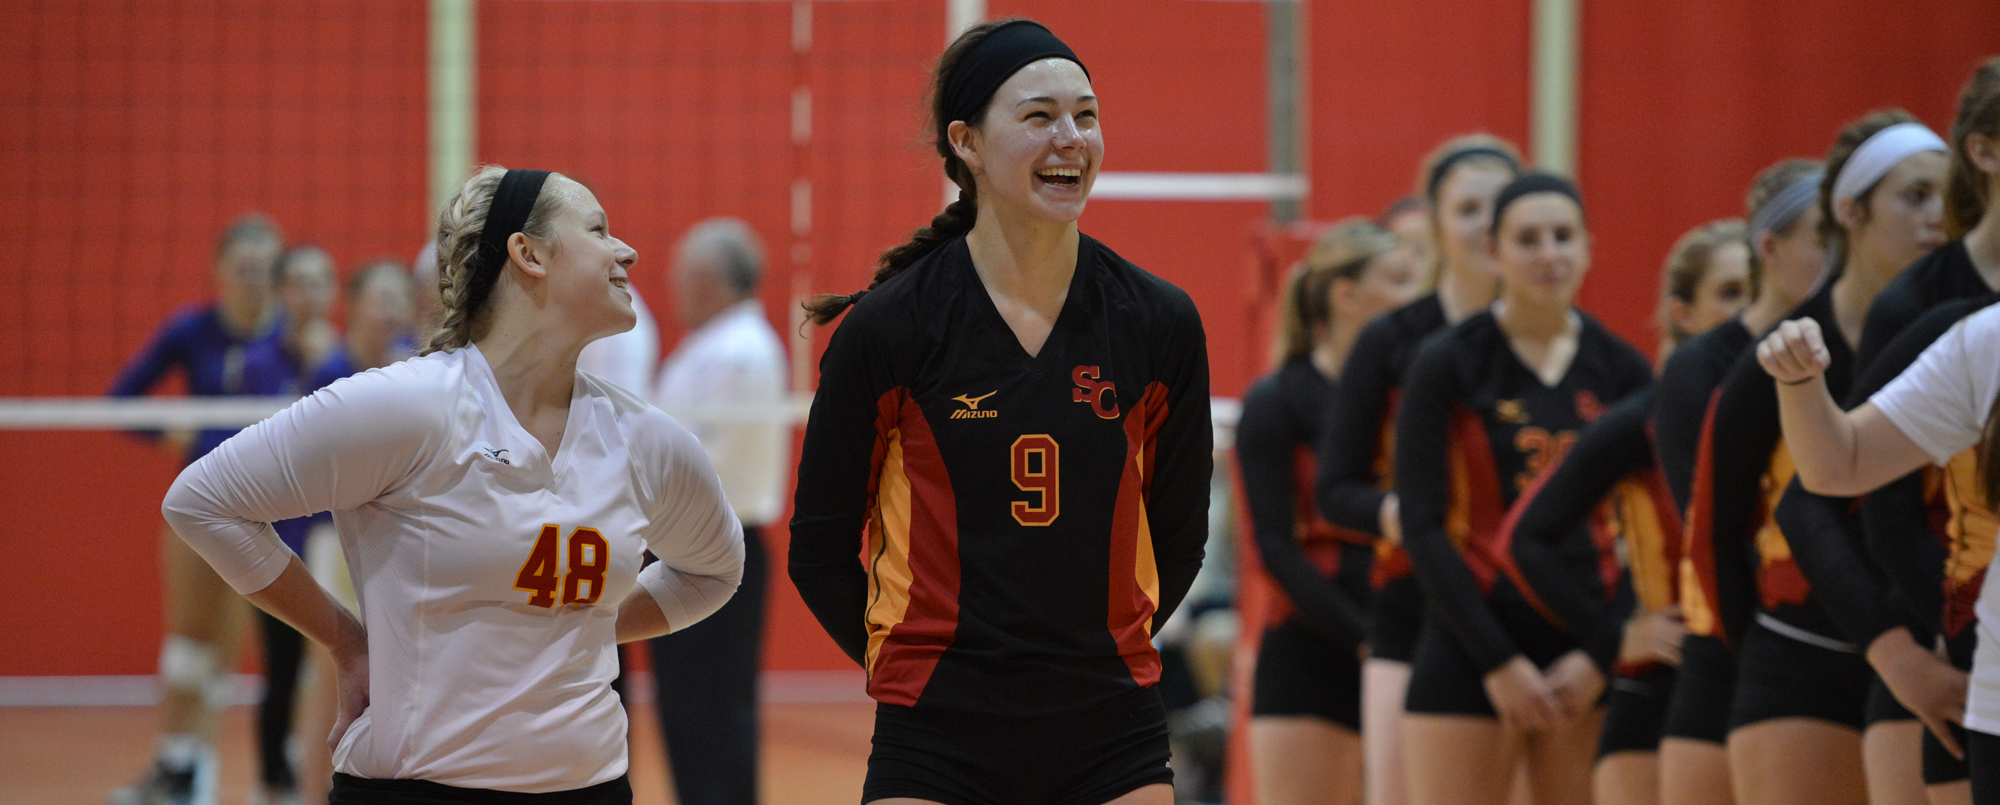 Luth named all-tournament team, volleyball goes 2-2 at Augustana to close season